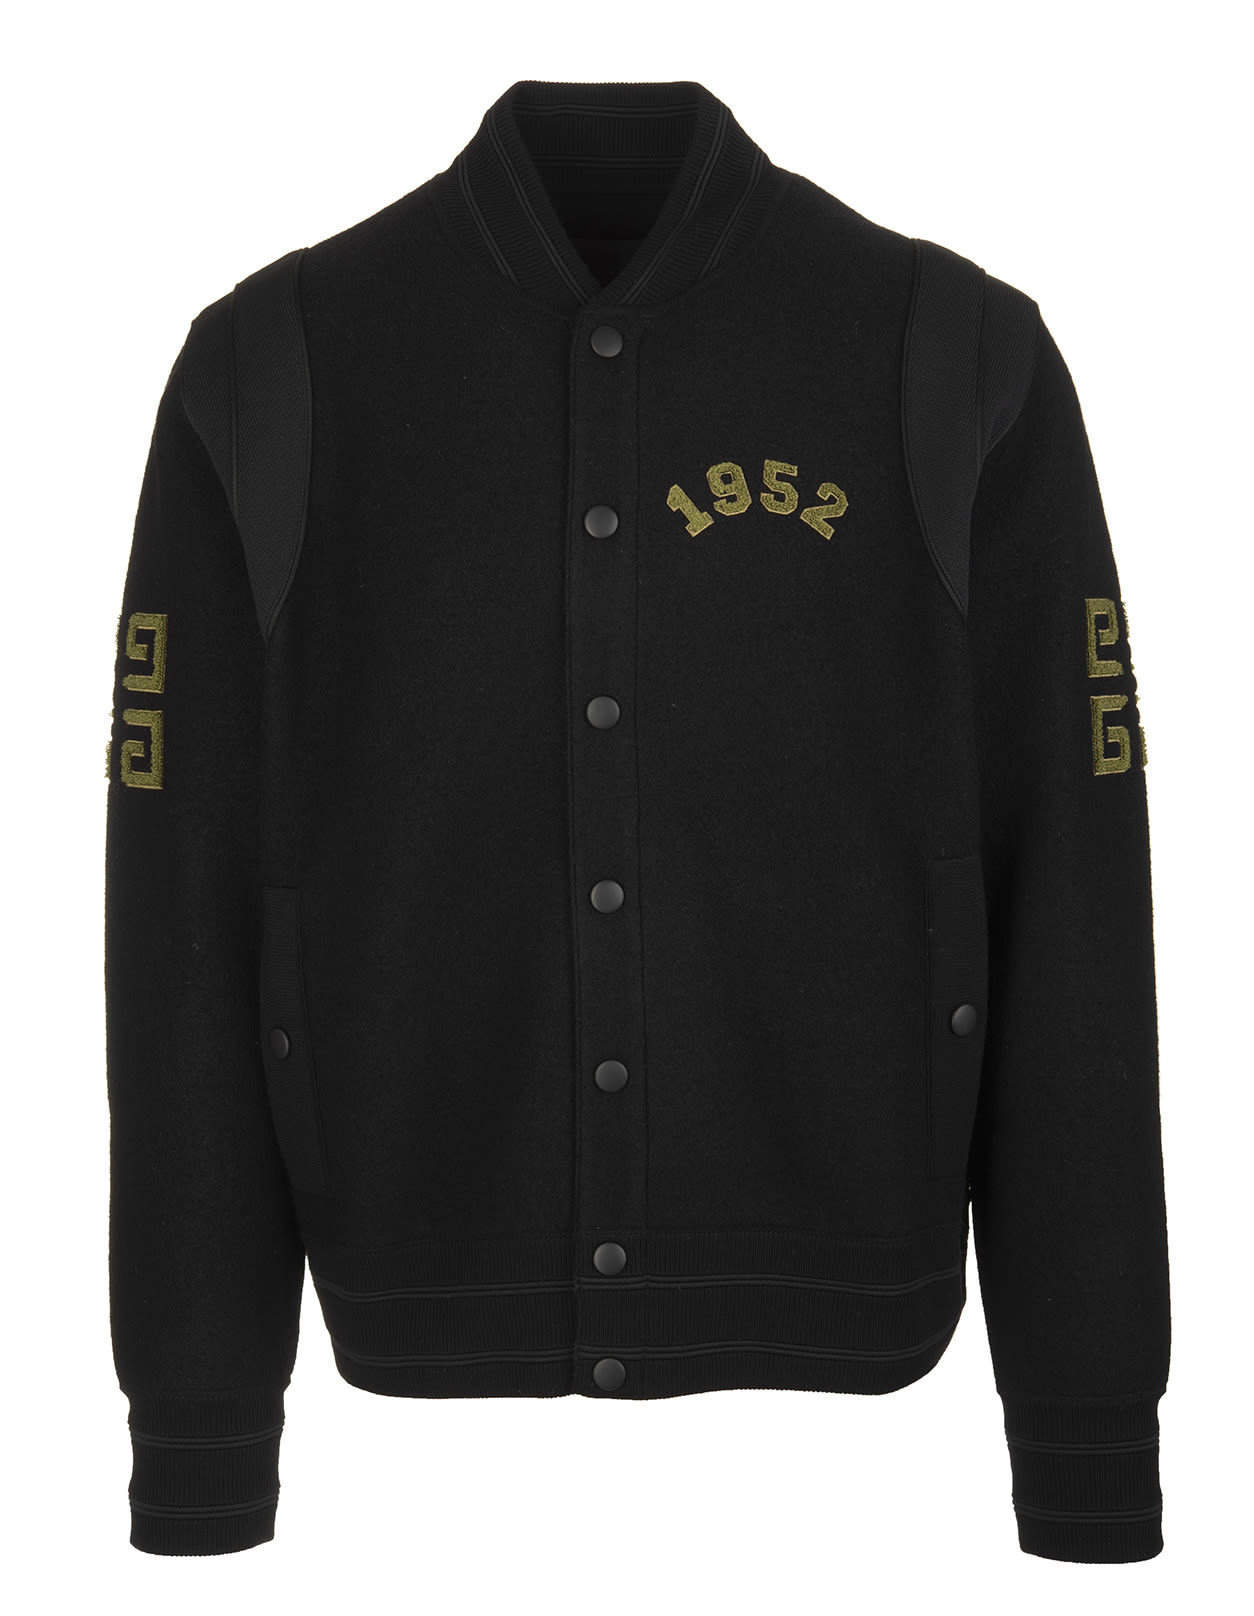 Givenchy Man Black Bomber Jacket In Wool With Contrast Patches